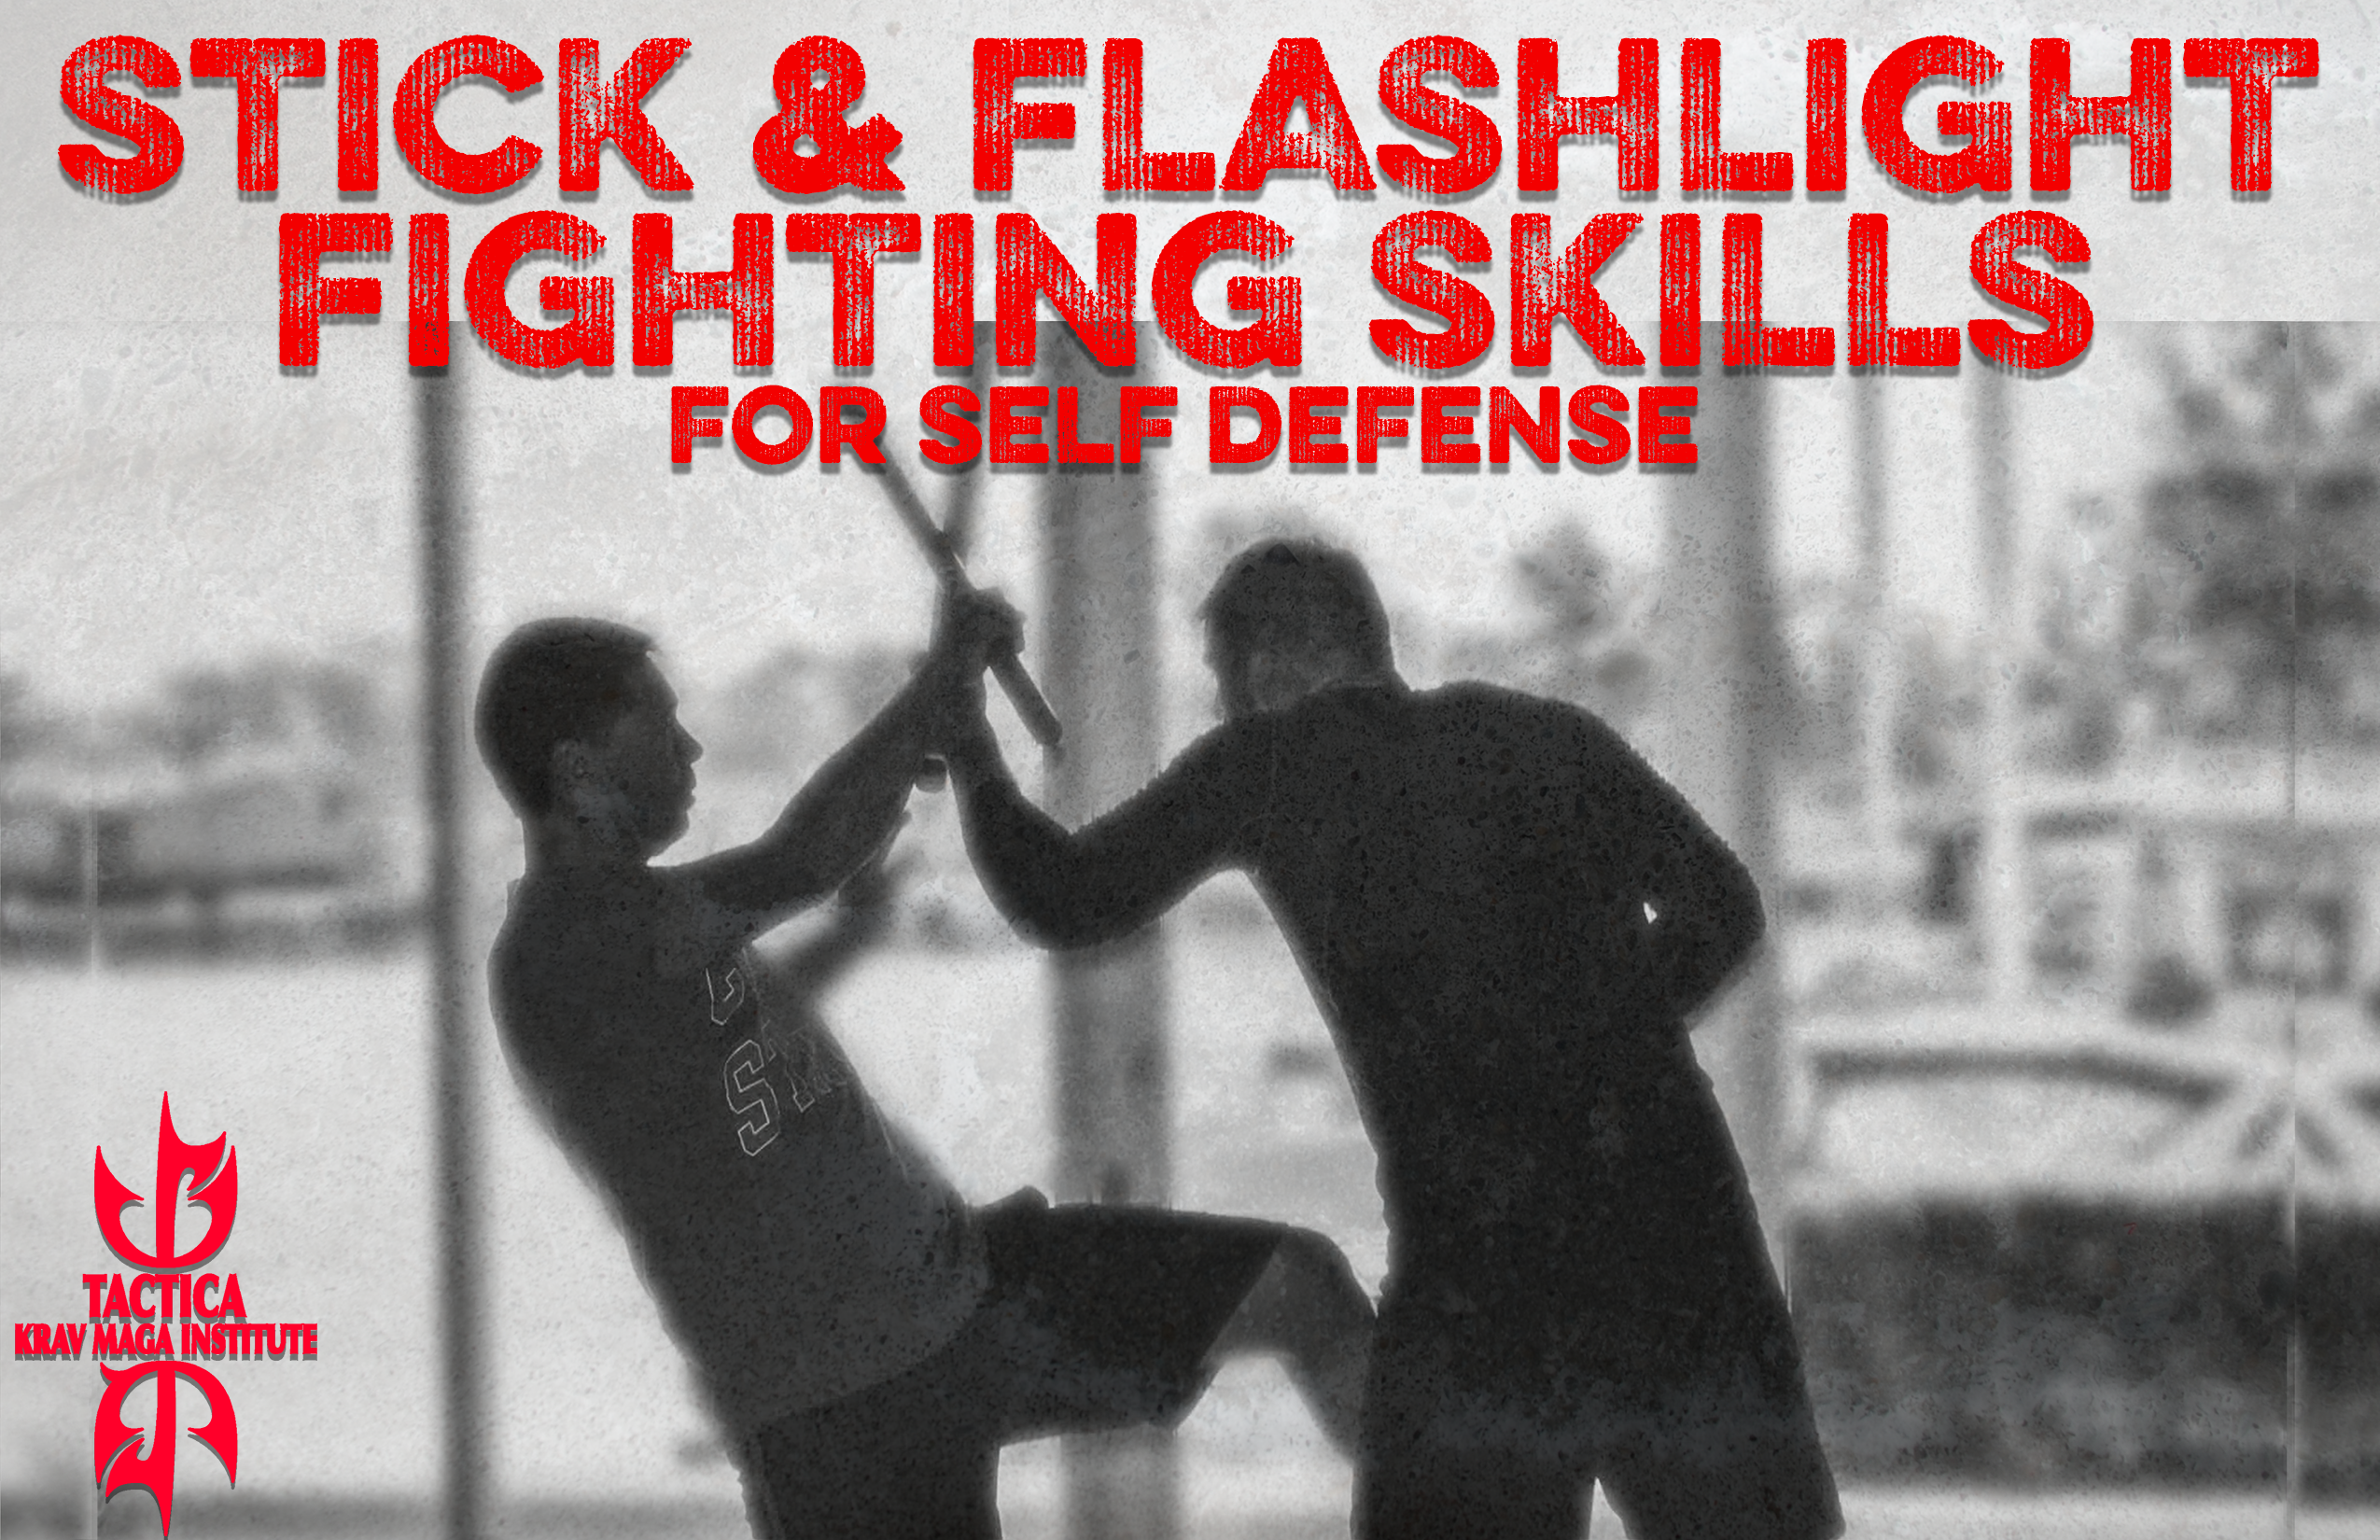 Learn self-defense skills and learn how to fight.